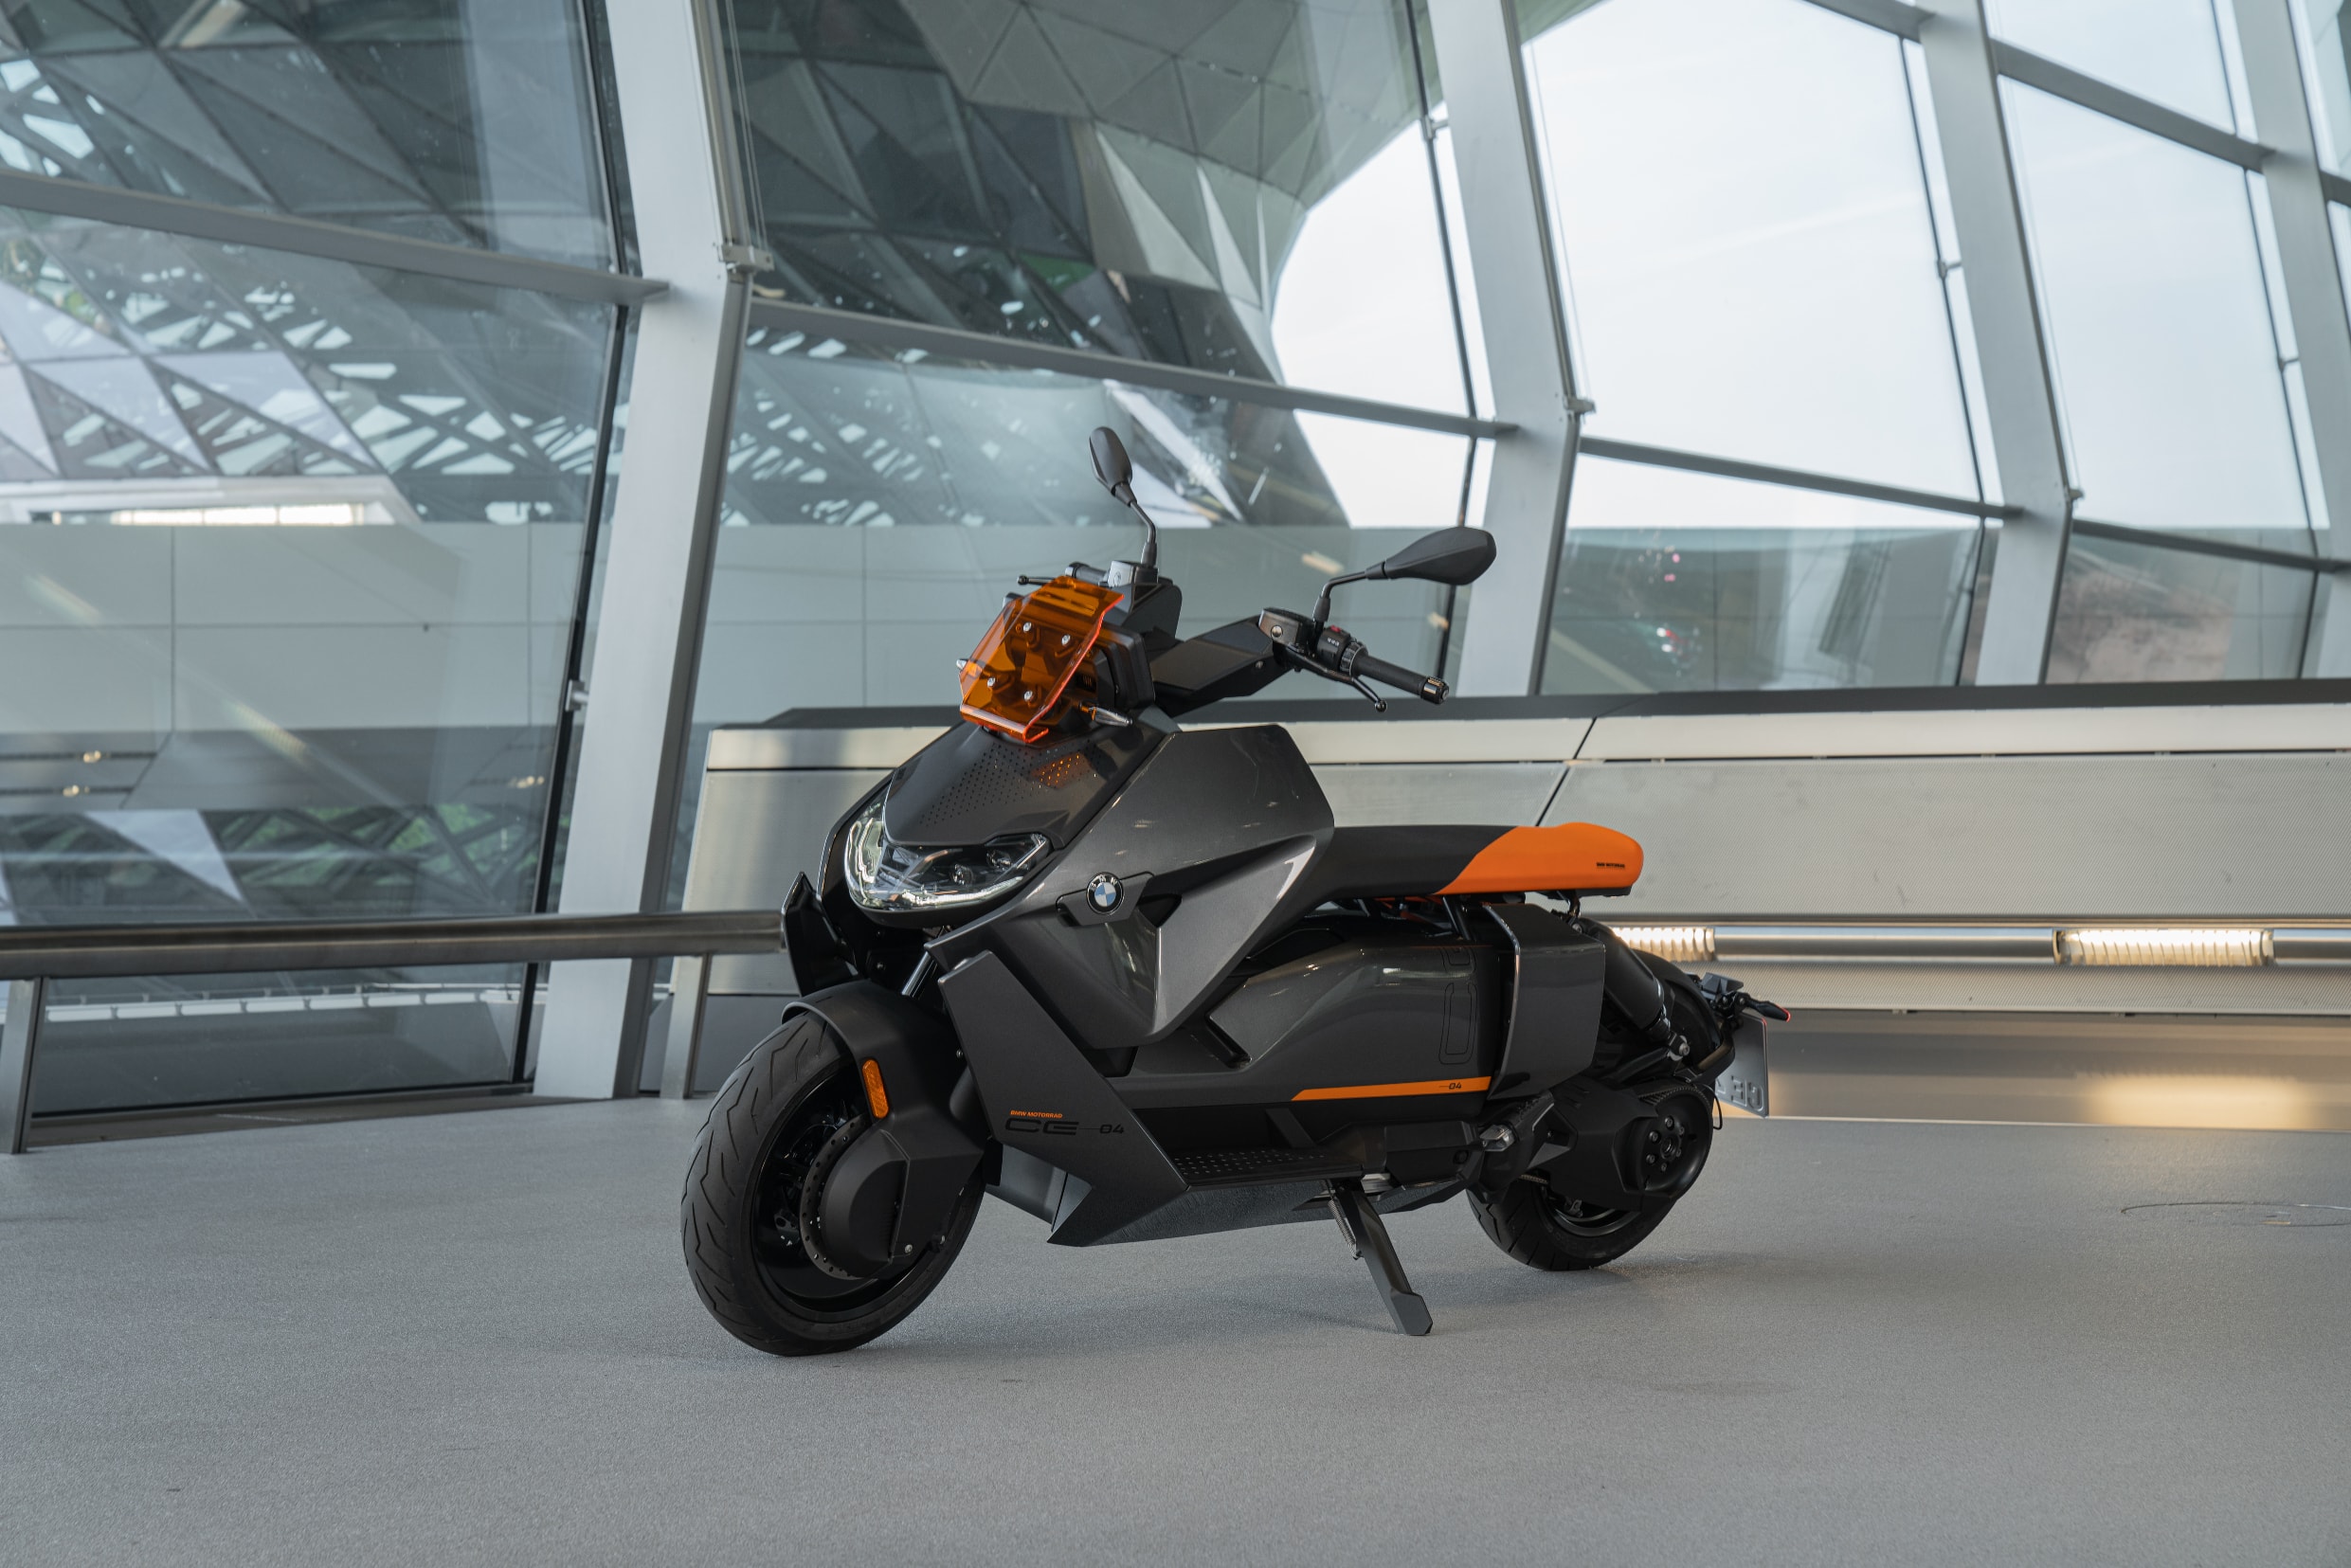 BMW Announces 2022 CE 04 Electric Scooter - Proudly Displays Motorrad  Heritage - autoevolution